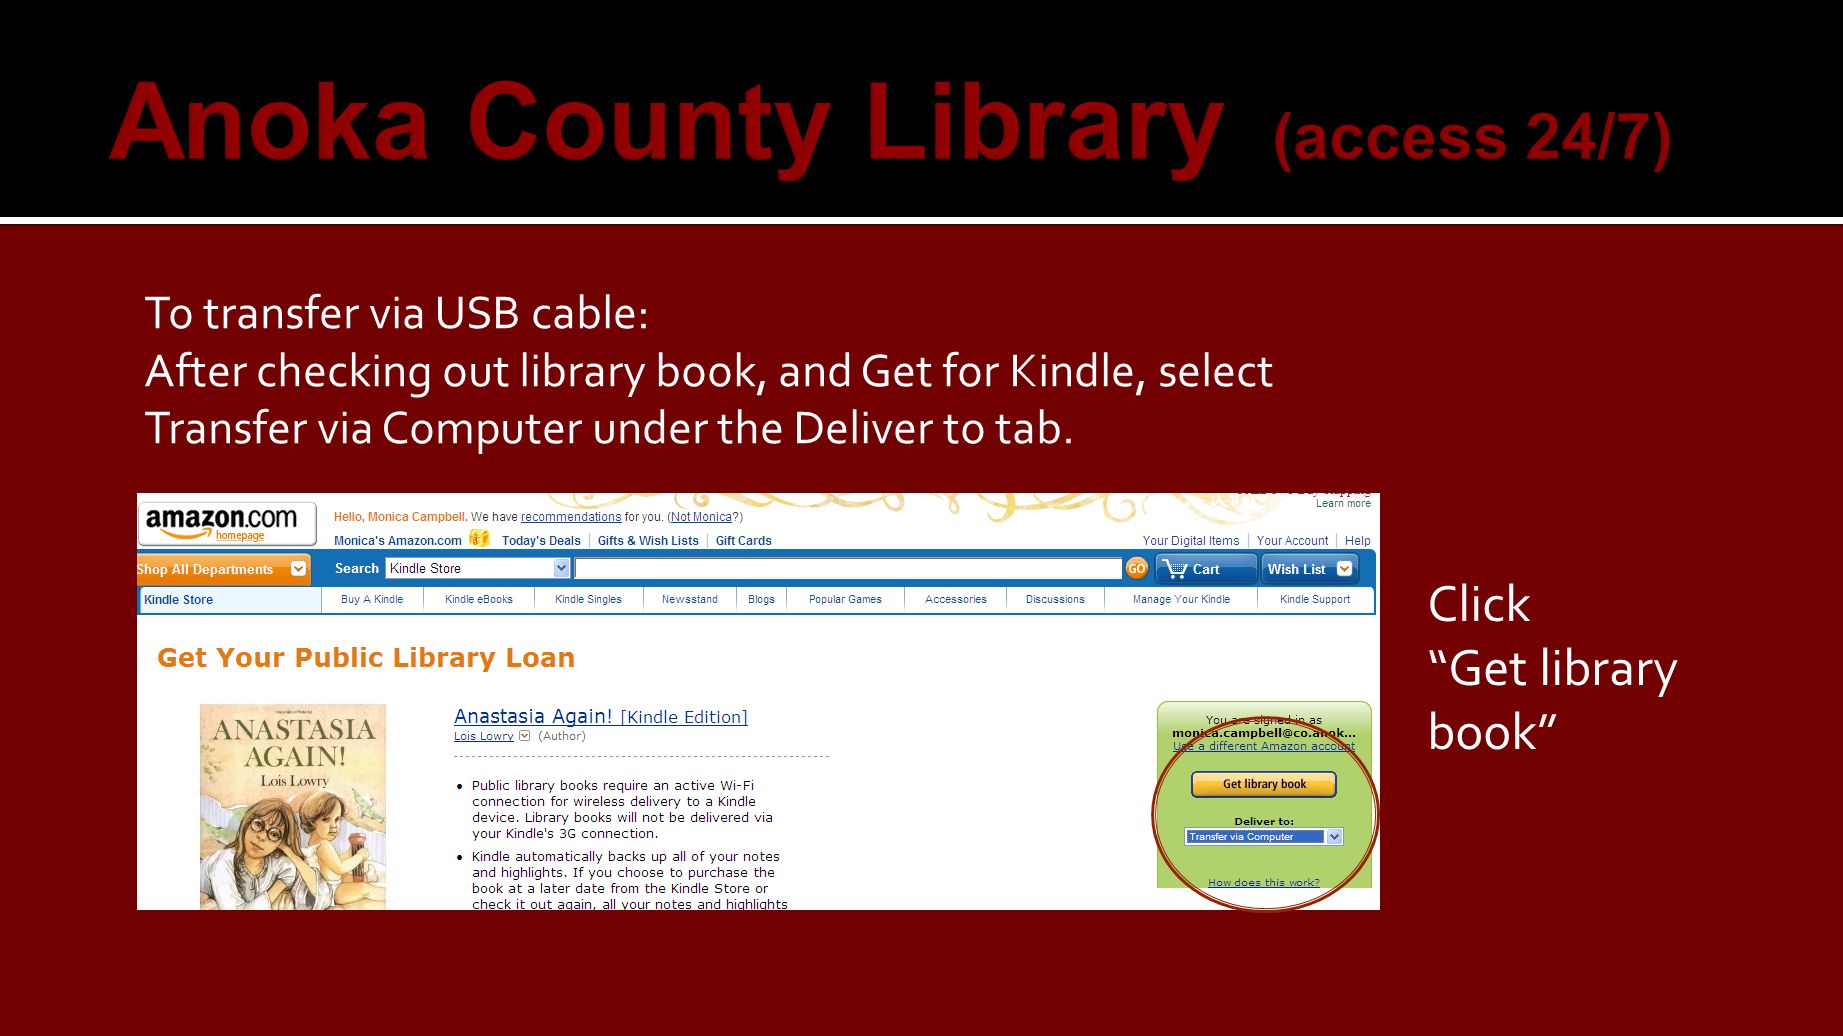 To transfer via USB cable: After checking out library book, and Get for Kindle, select Transfer via Computer under the Deliver to tab.